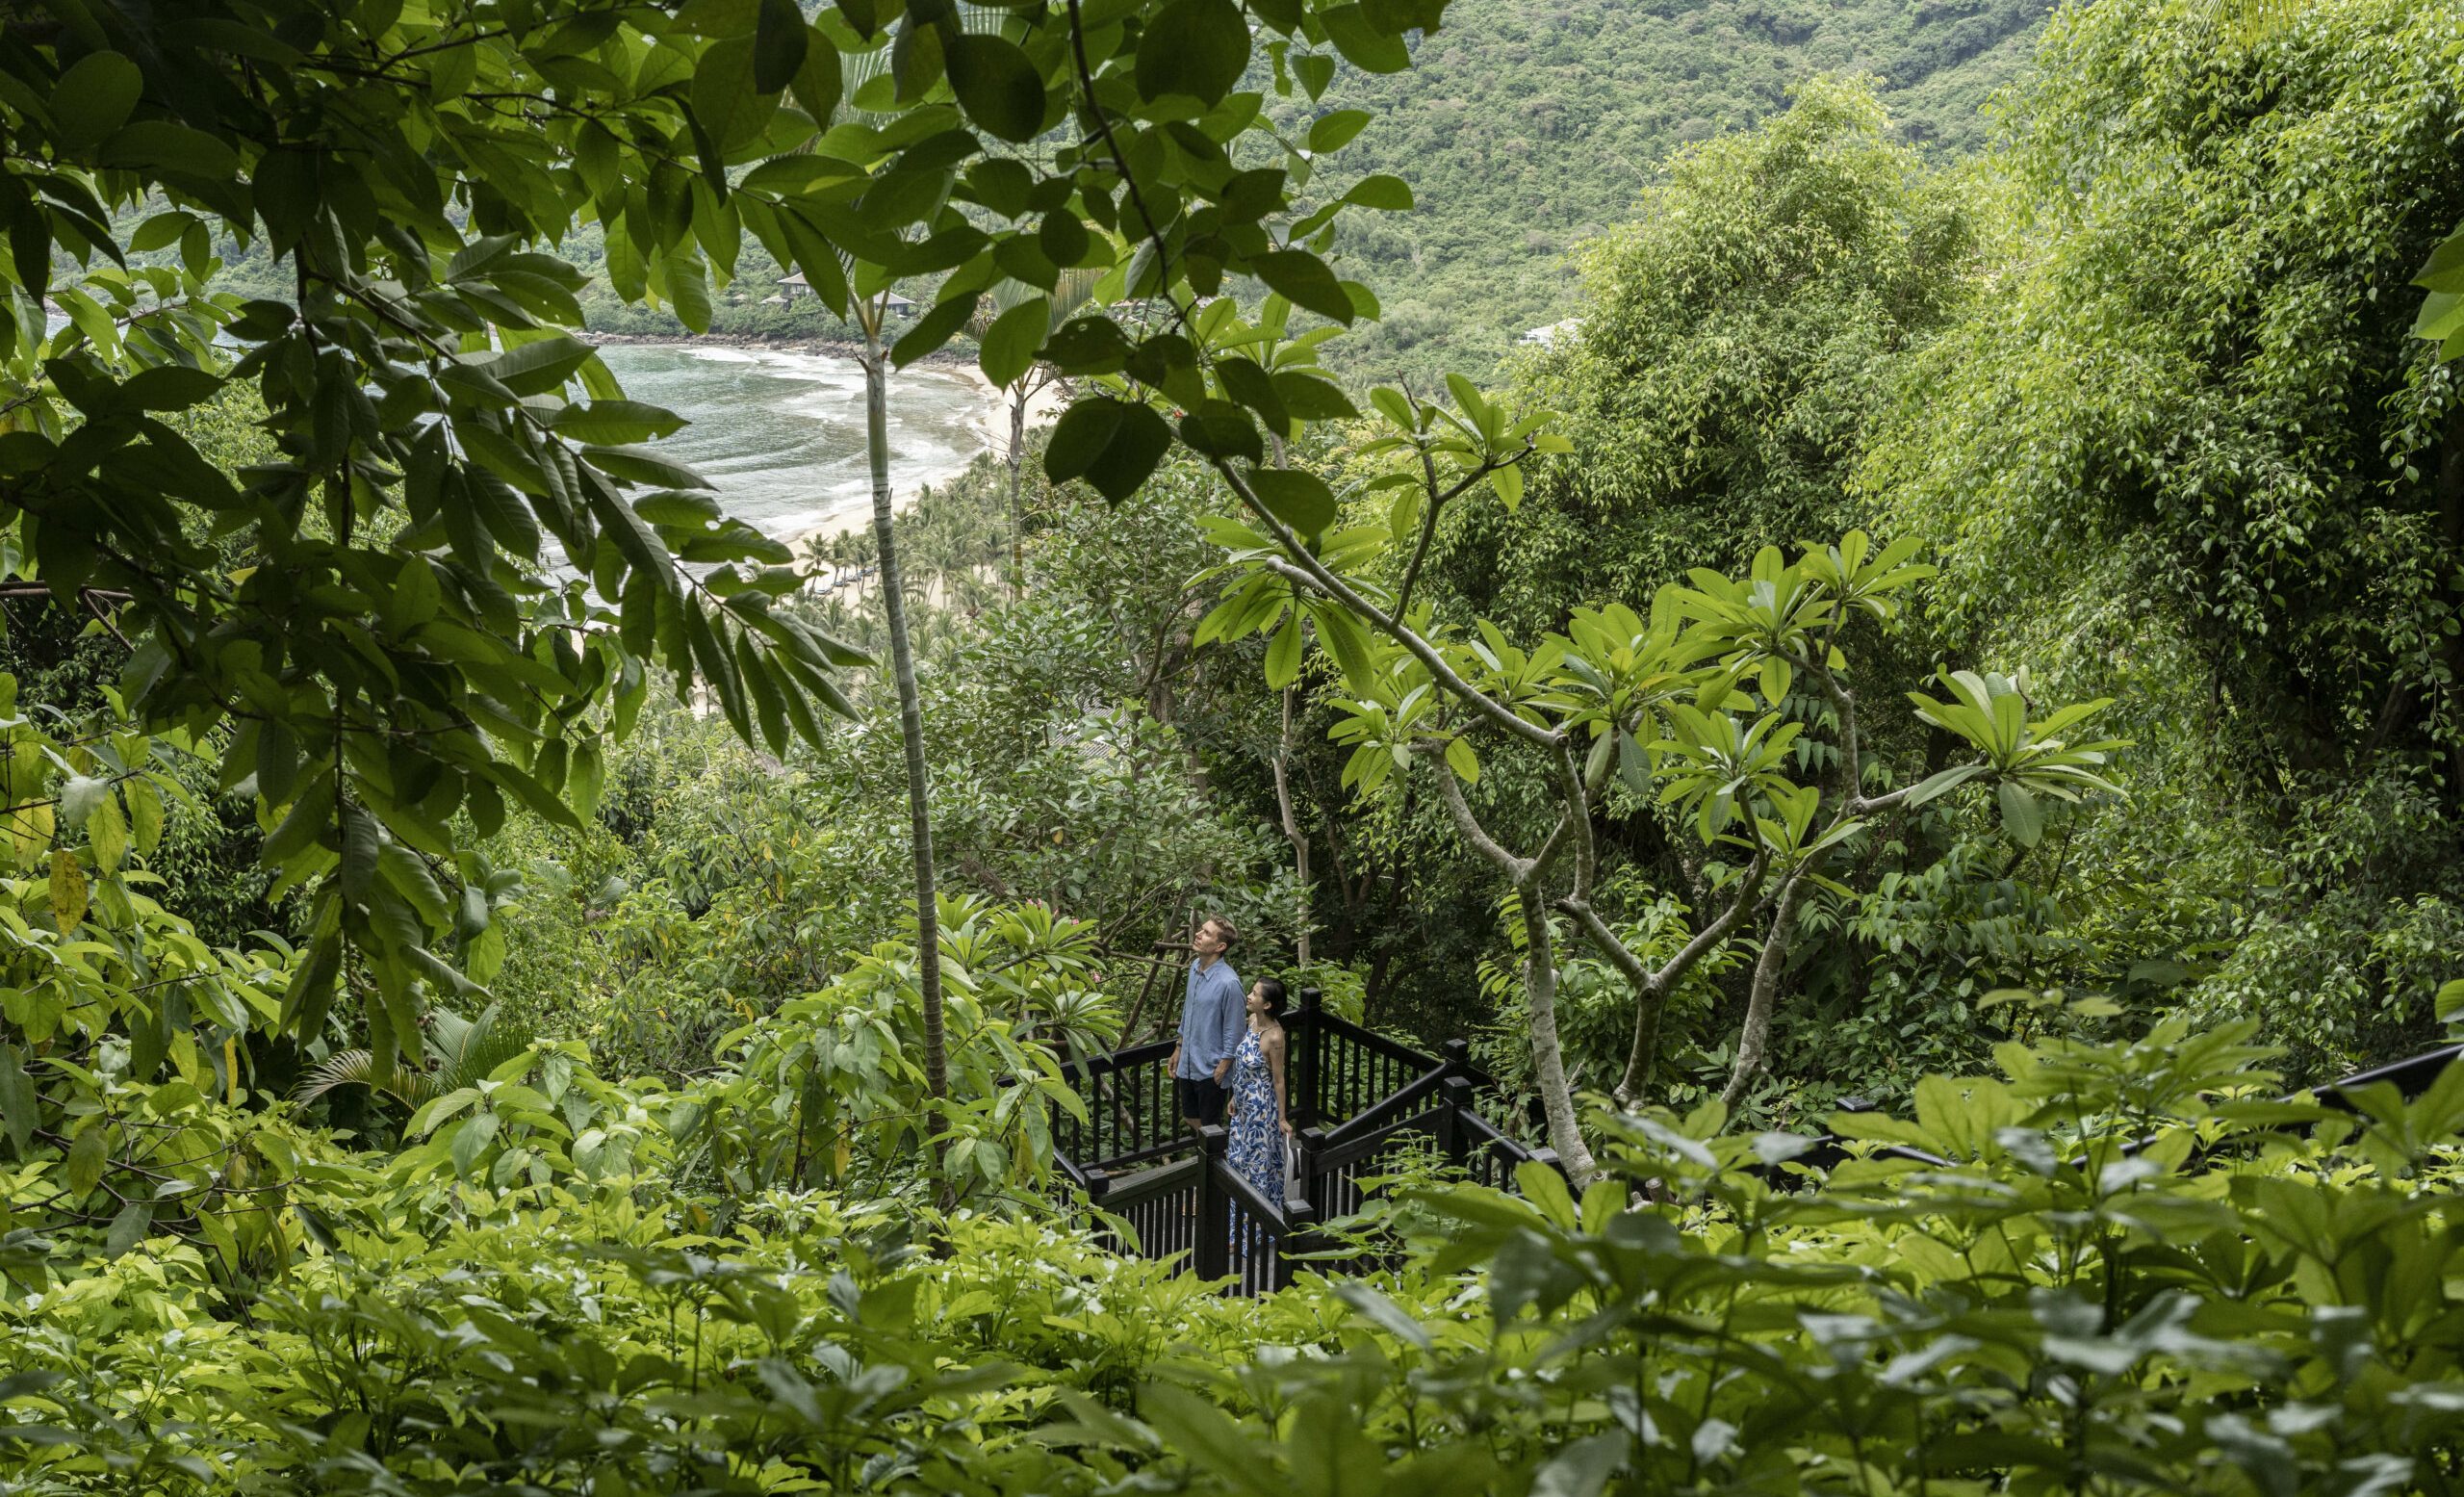 Couple walking in tropical rainforest garden with beach in distance